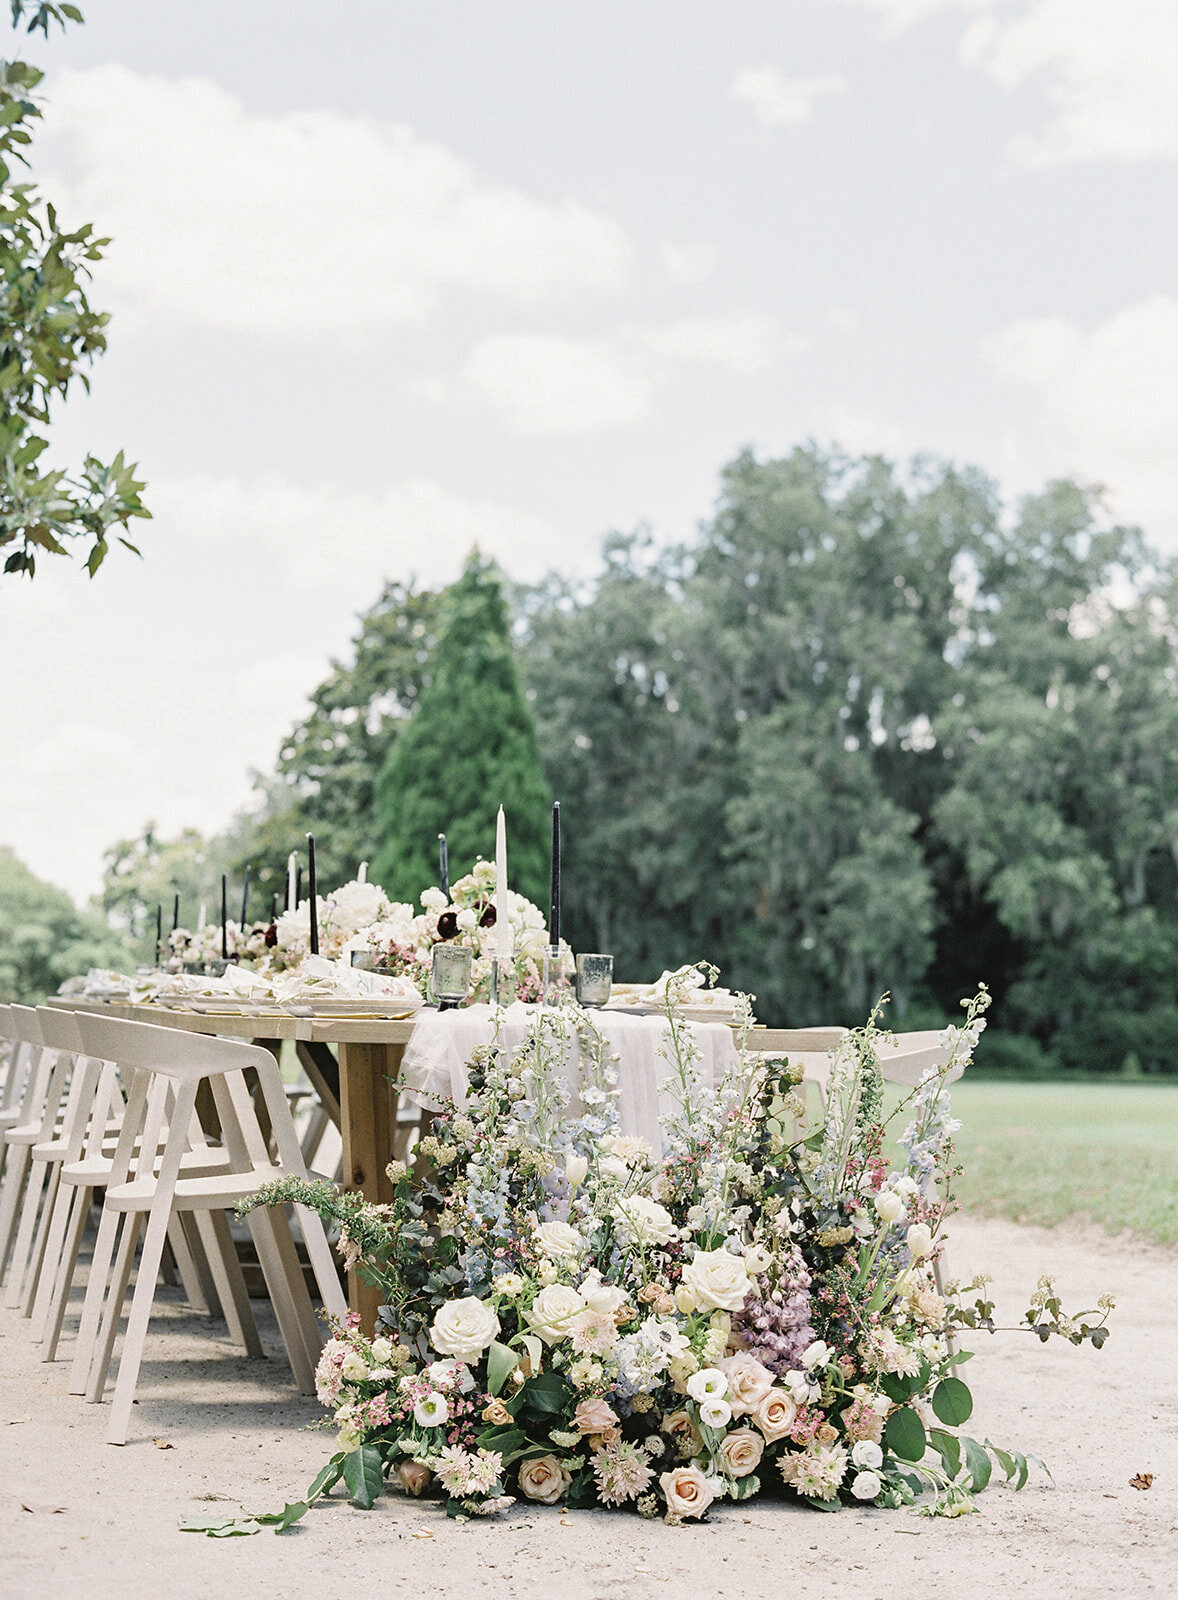 Outdoor reception table with floral installation from ground to top of the table. Flowers are in deep purples, pinks, greens, ivory and taupe. Kings table with 16 guest spots, cream colored chairs, hand dyed linens running down the center of the table. Flowers continue down the middle of the table with black and white candles. Photographed at Middleton Place by wedding photographers in Charleston Amy Mulder Photography.